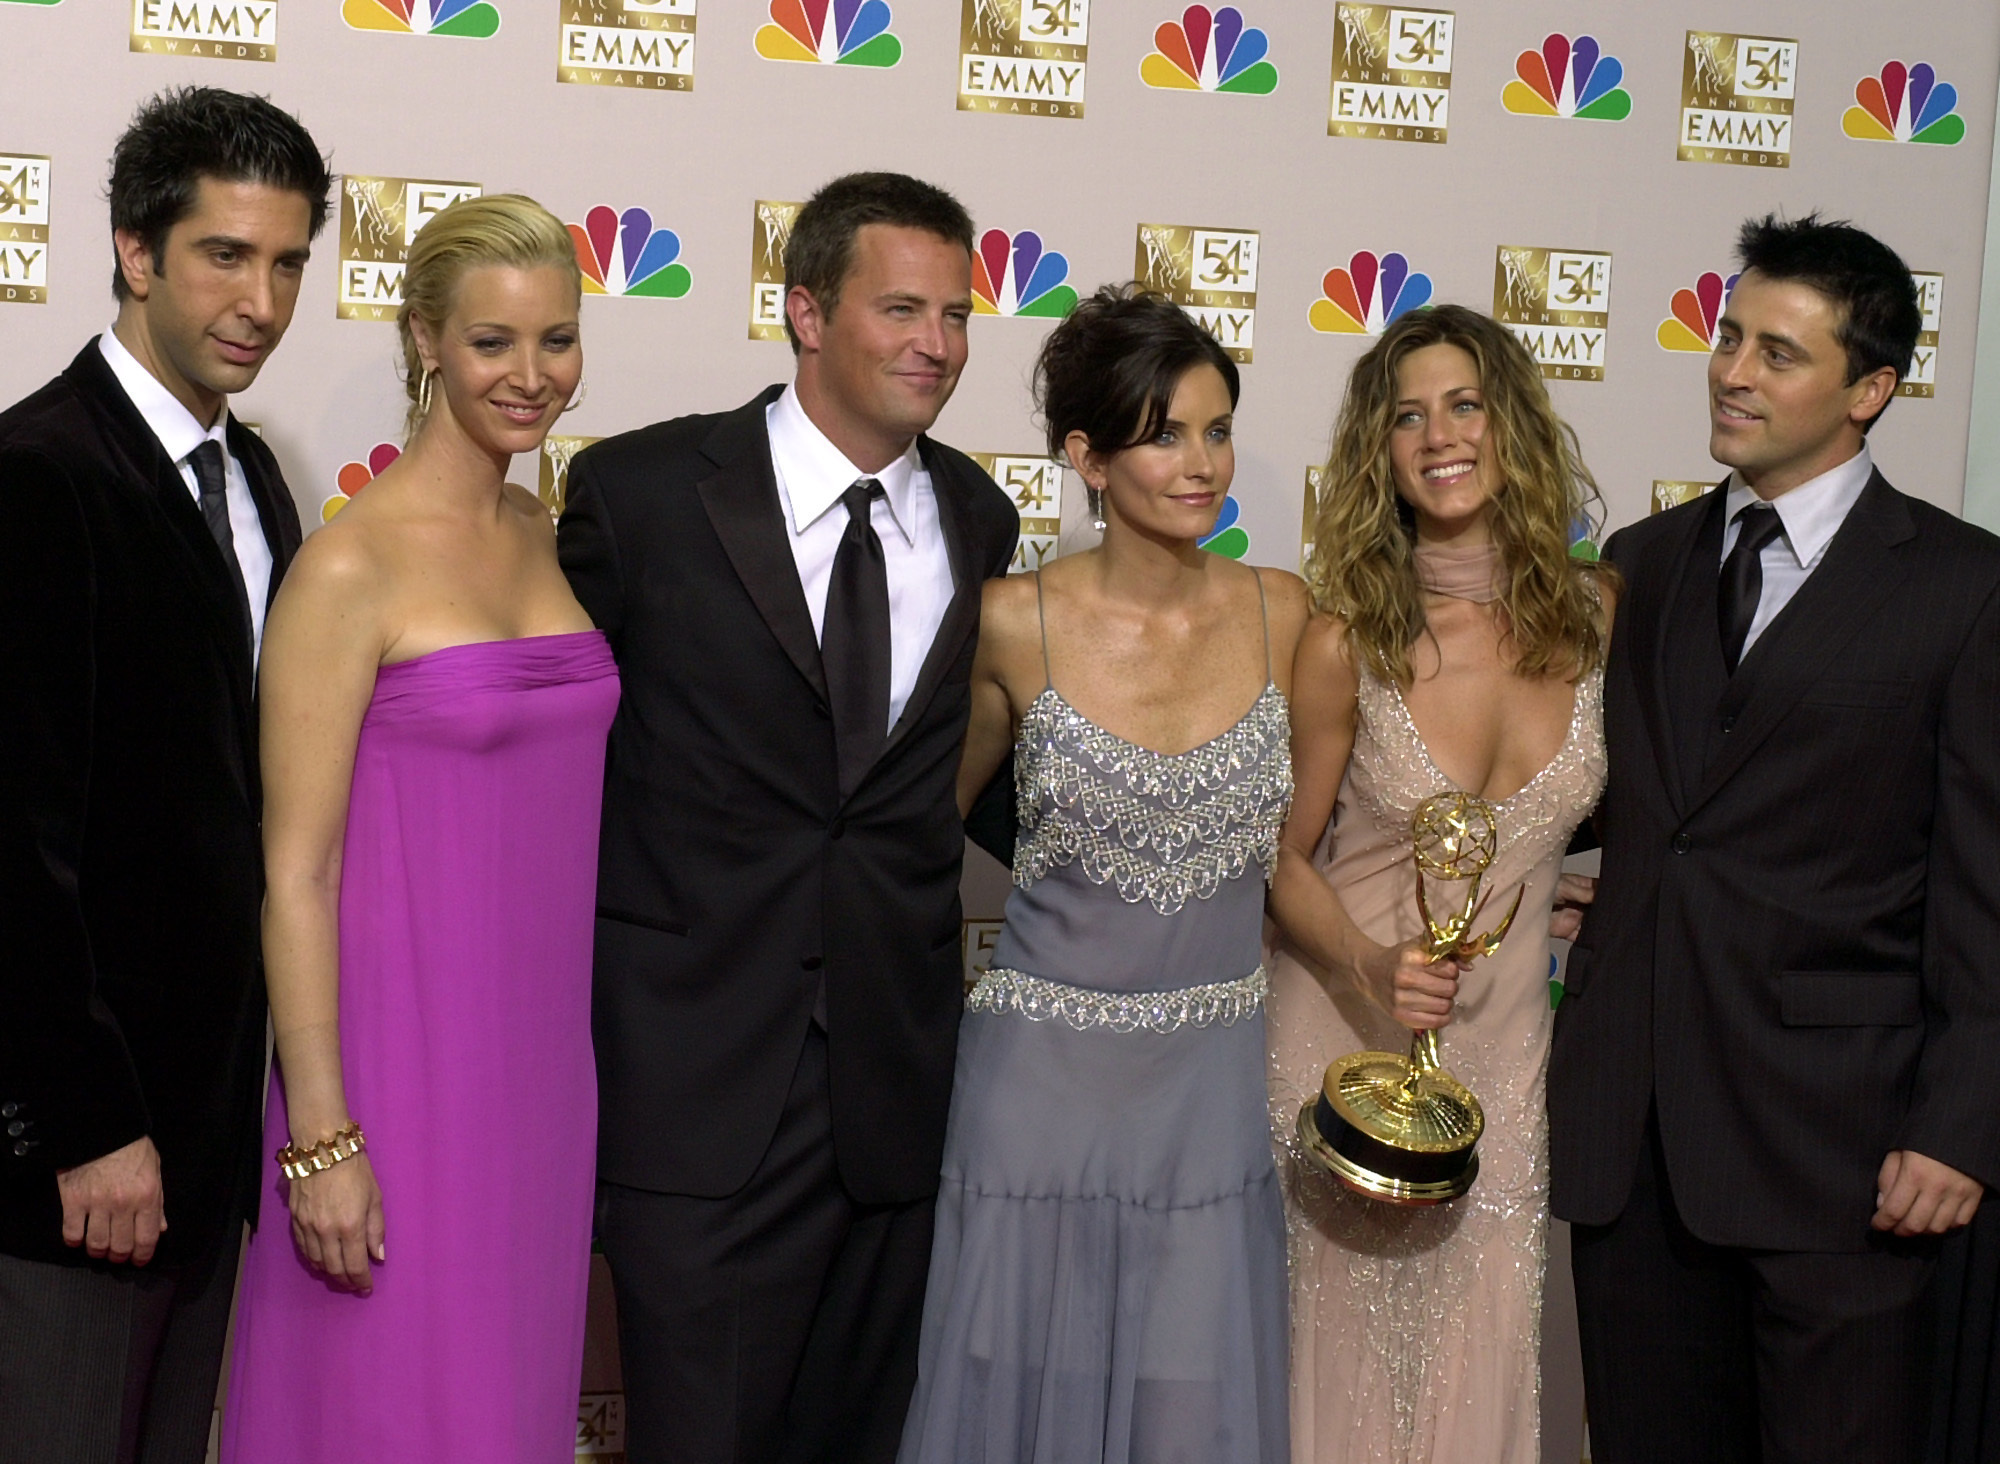 FILE - The stars of "Friends," from left, David Schwimmer, Lisa Kudrow, Matthew Perry, Courtney Cox, Jennifer Aniston and Matt LeBlanc pose after the show won outstanding comedy series at the 54th Annual Primetime Emmy Awards on Sept. 22, 2002, Los Angeles.